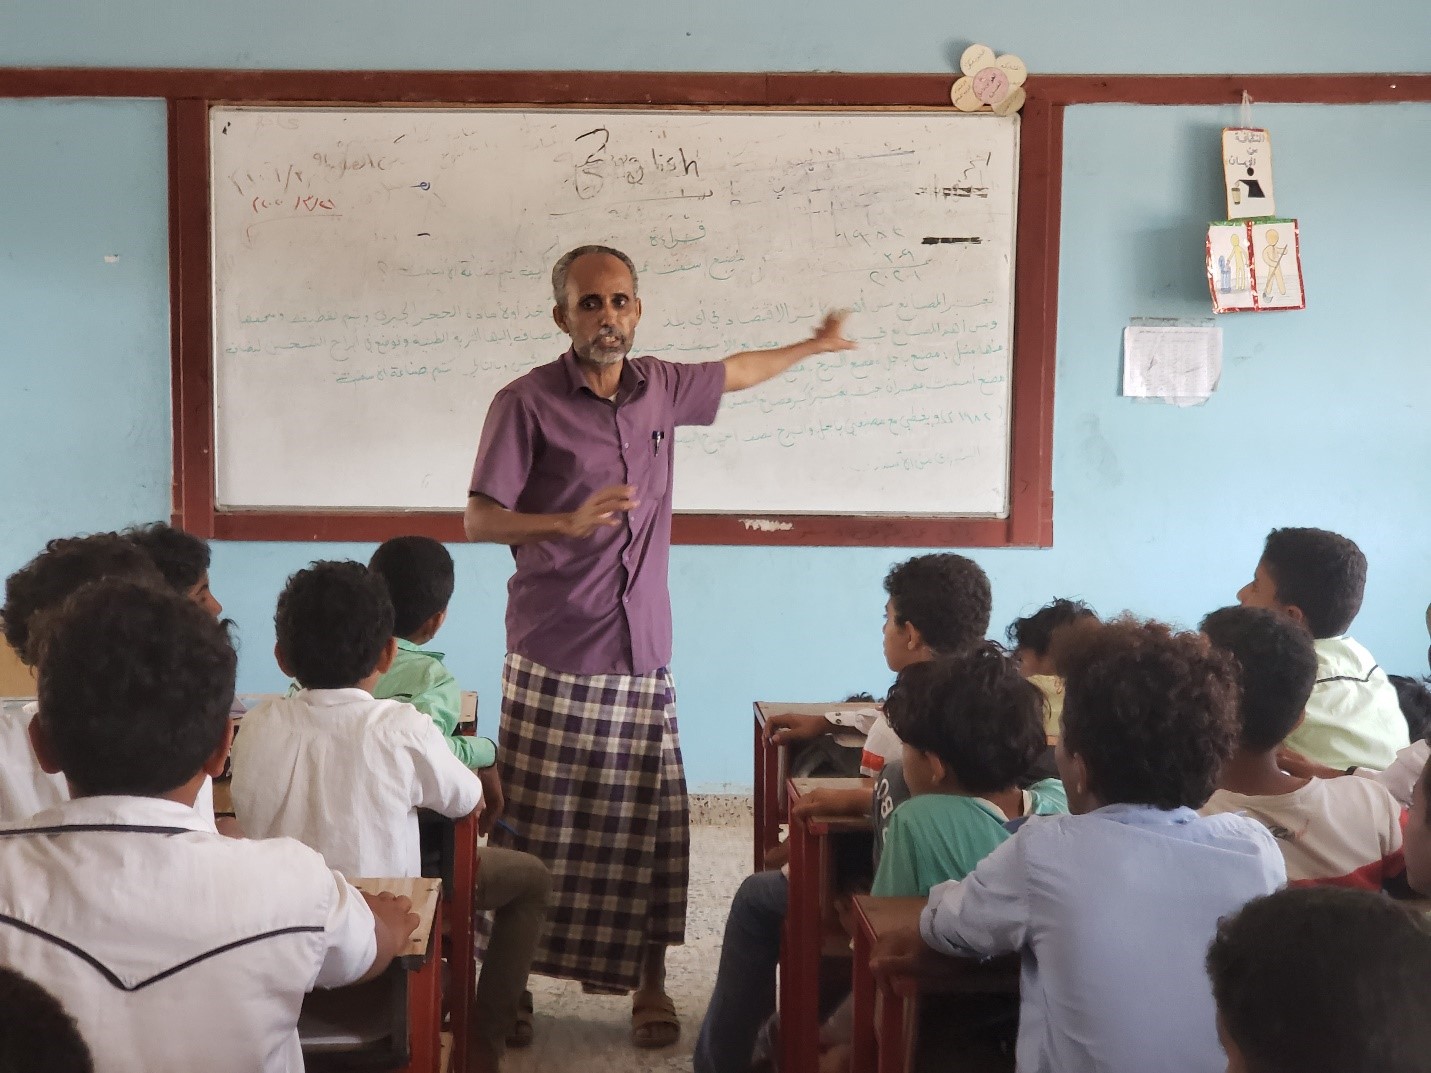 A man standing in front of a class teaching